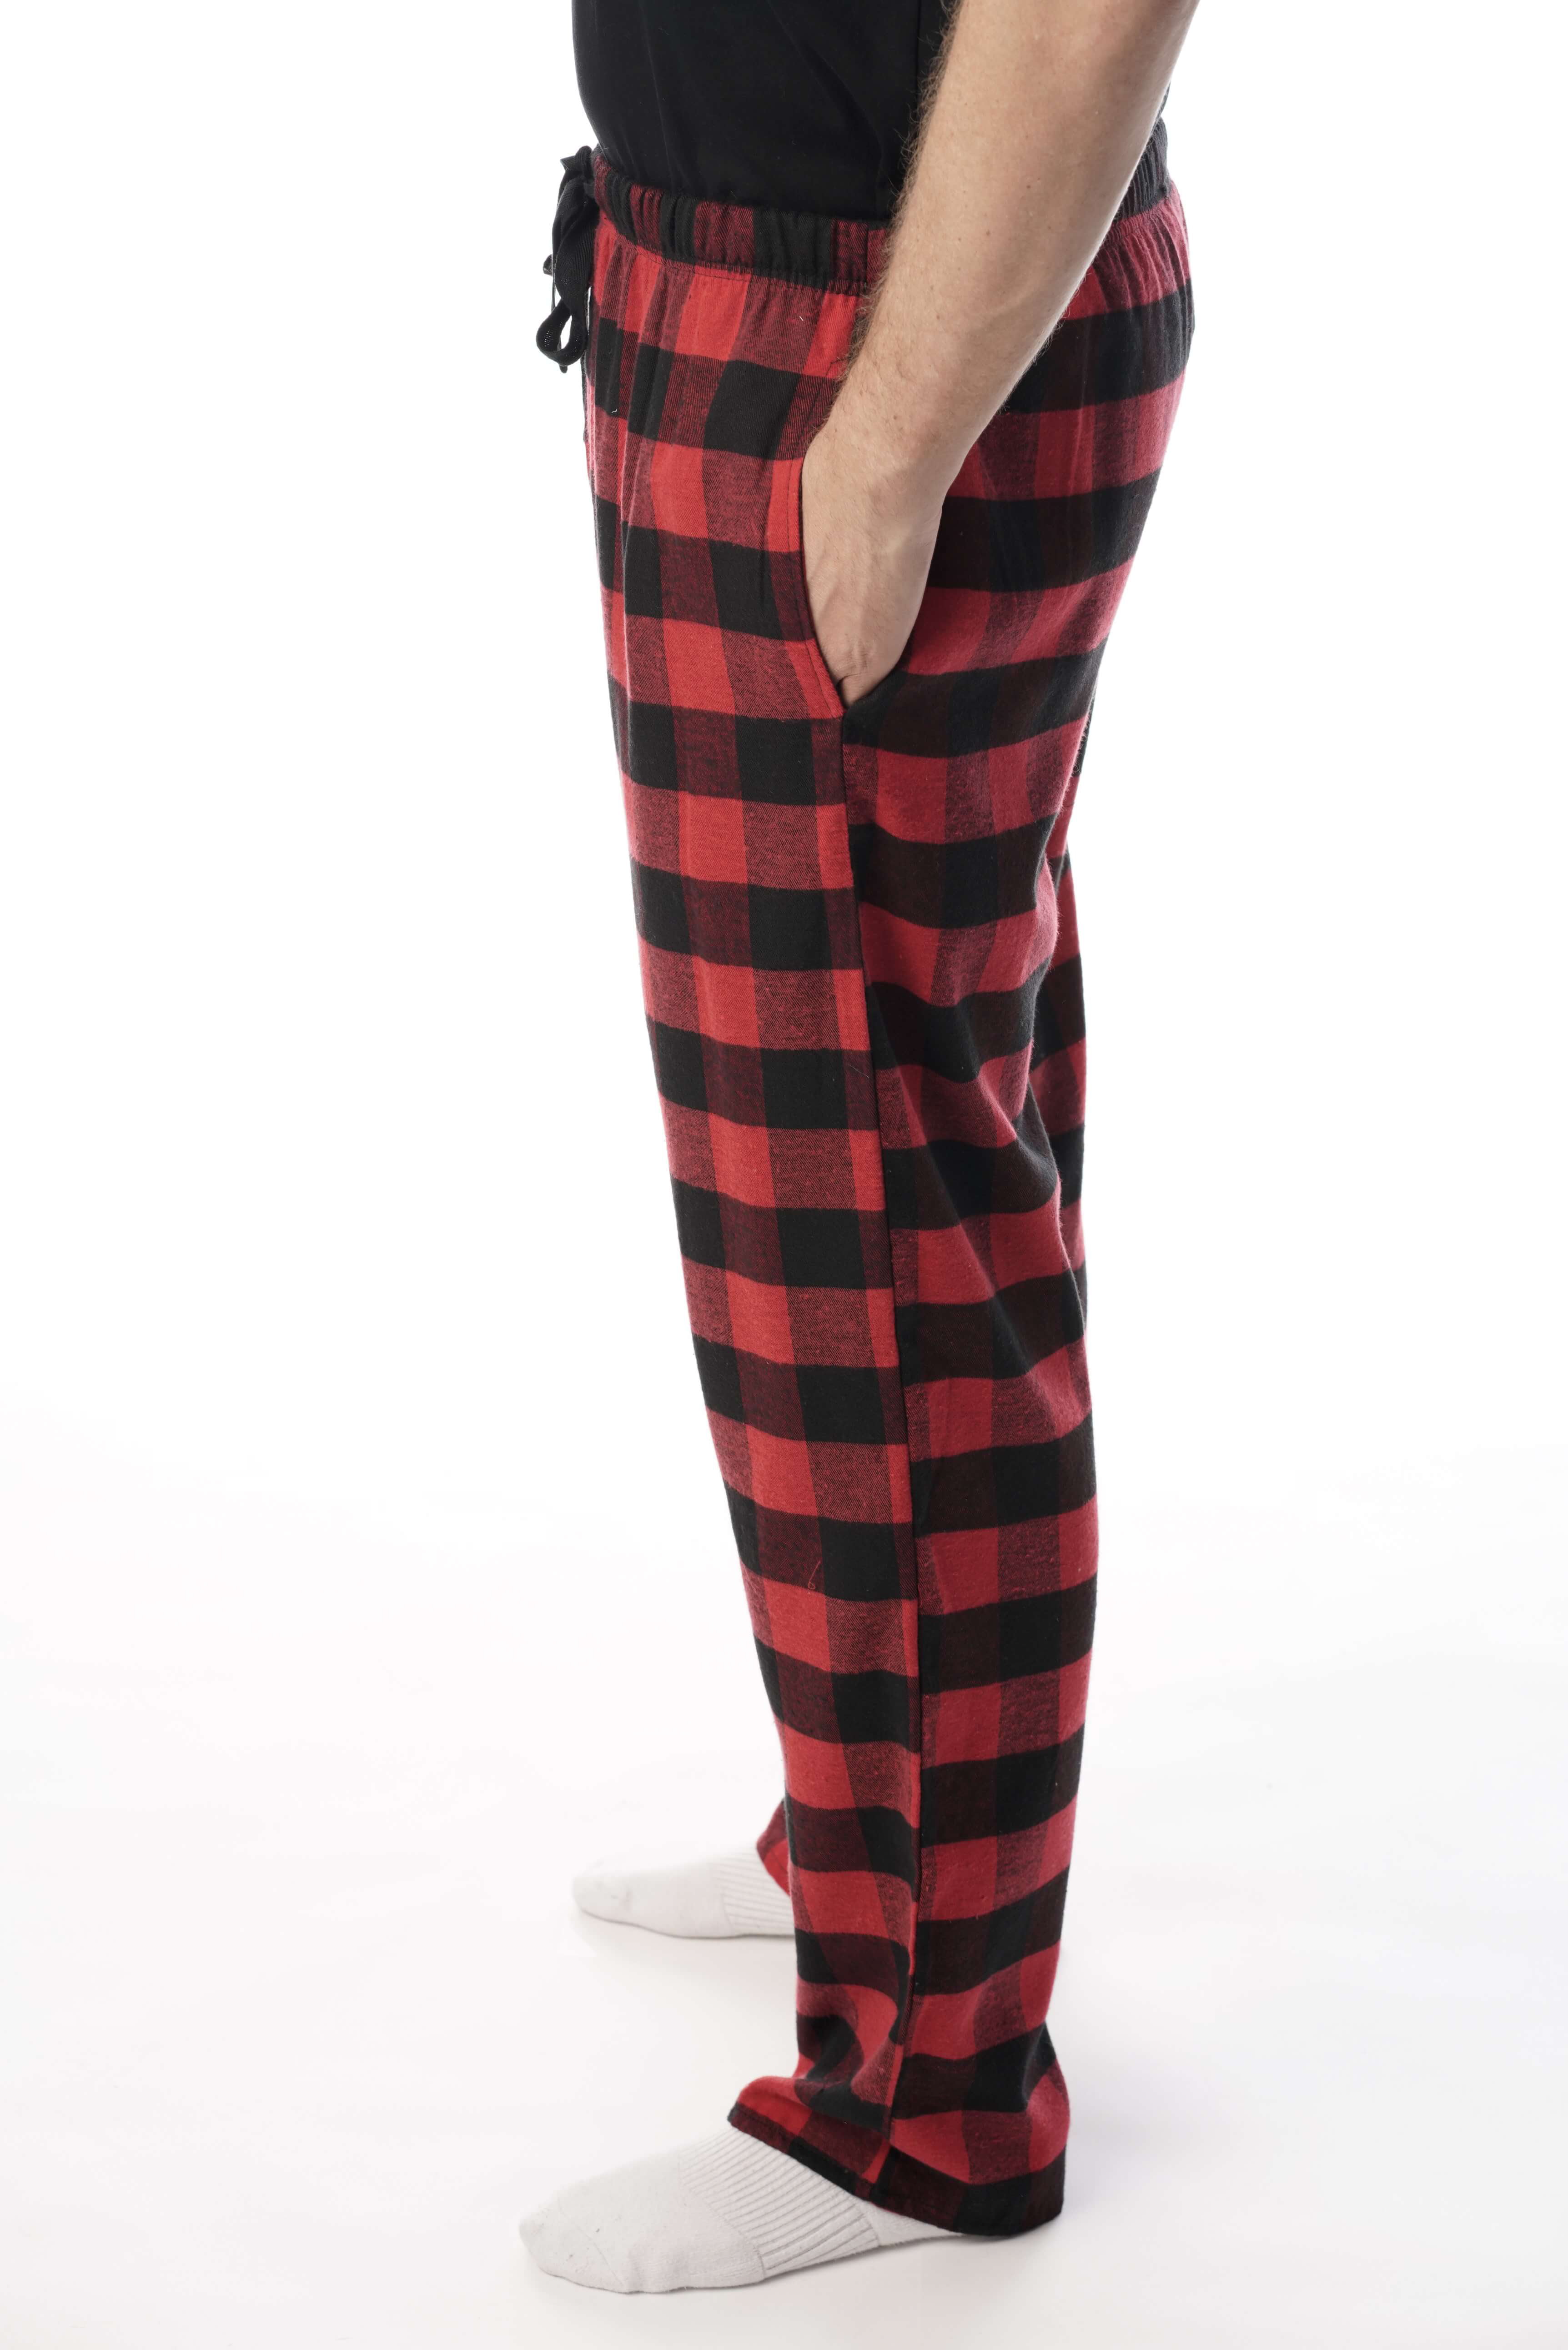 Mens 2pc. Flannel Pyjama / Red and Black Buffalo Check – Rocky Mountain  Flannel Company